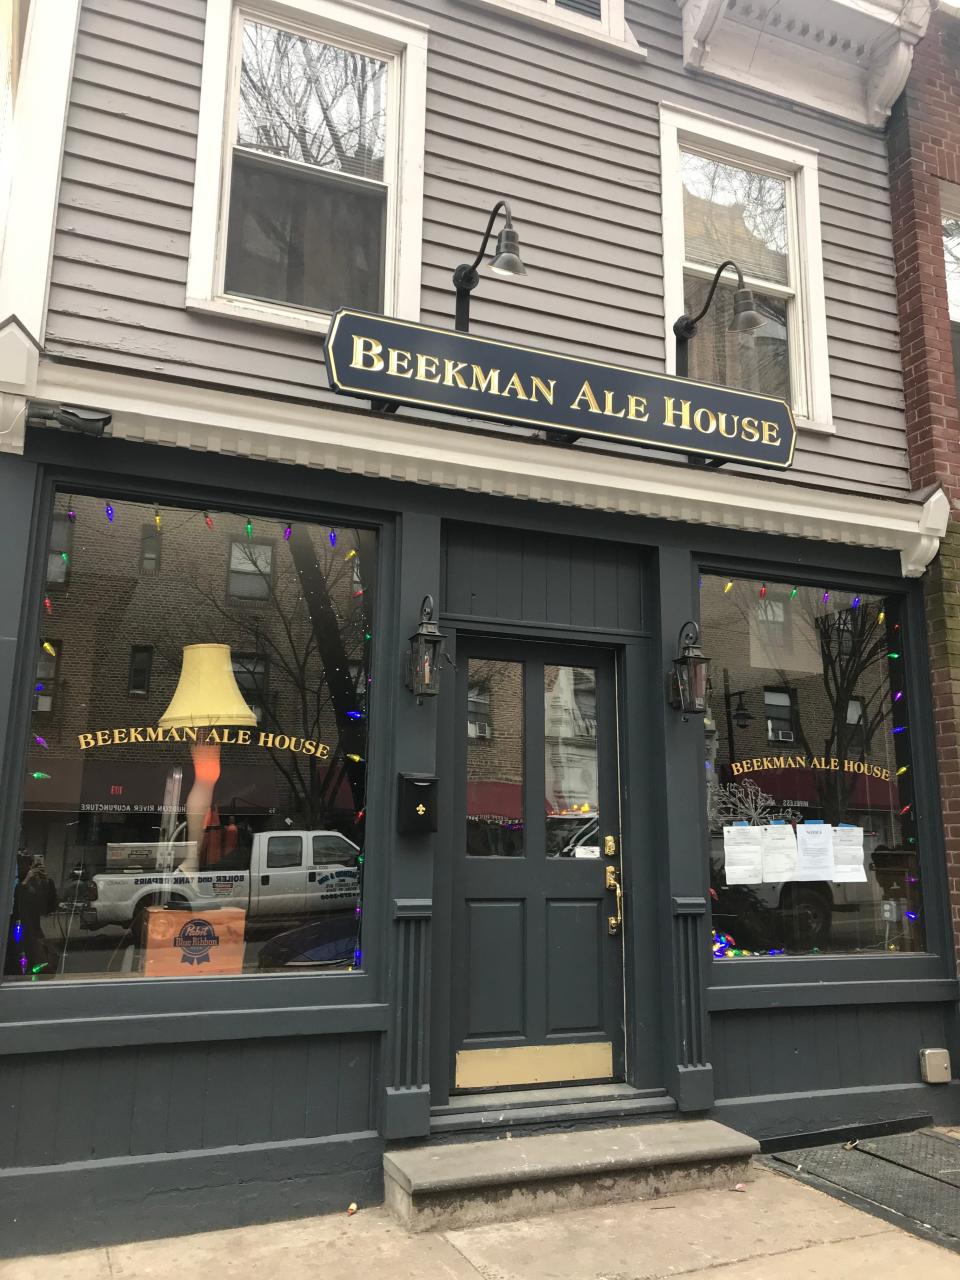 The Beekman Ale House in Sleepy Hollow, open since Feb. 2021, just landed number 92 on Yelp's "Top 100 Pizza Spots in the U.S."